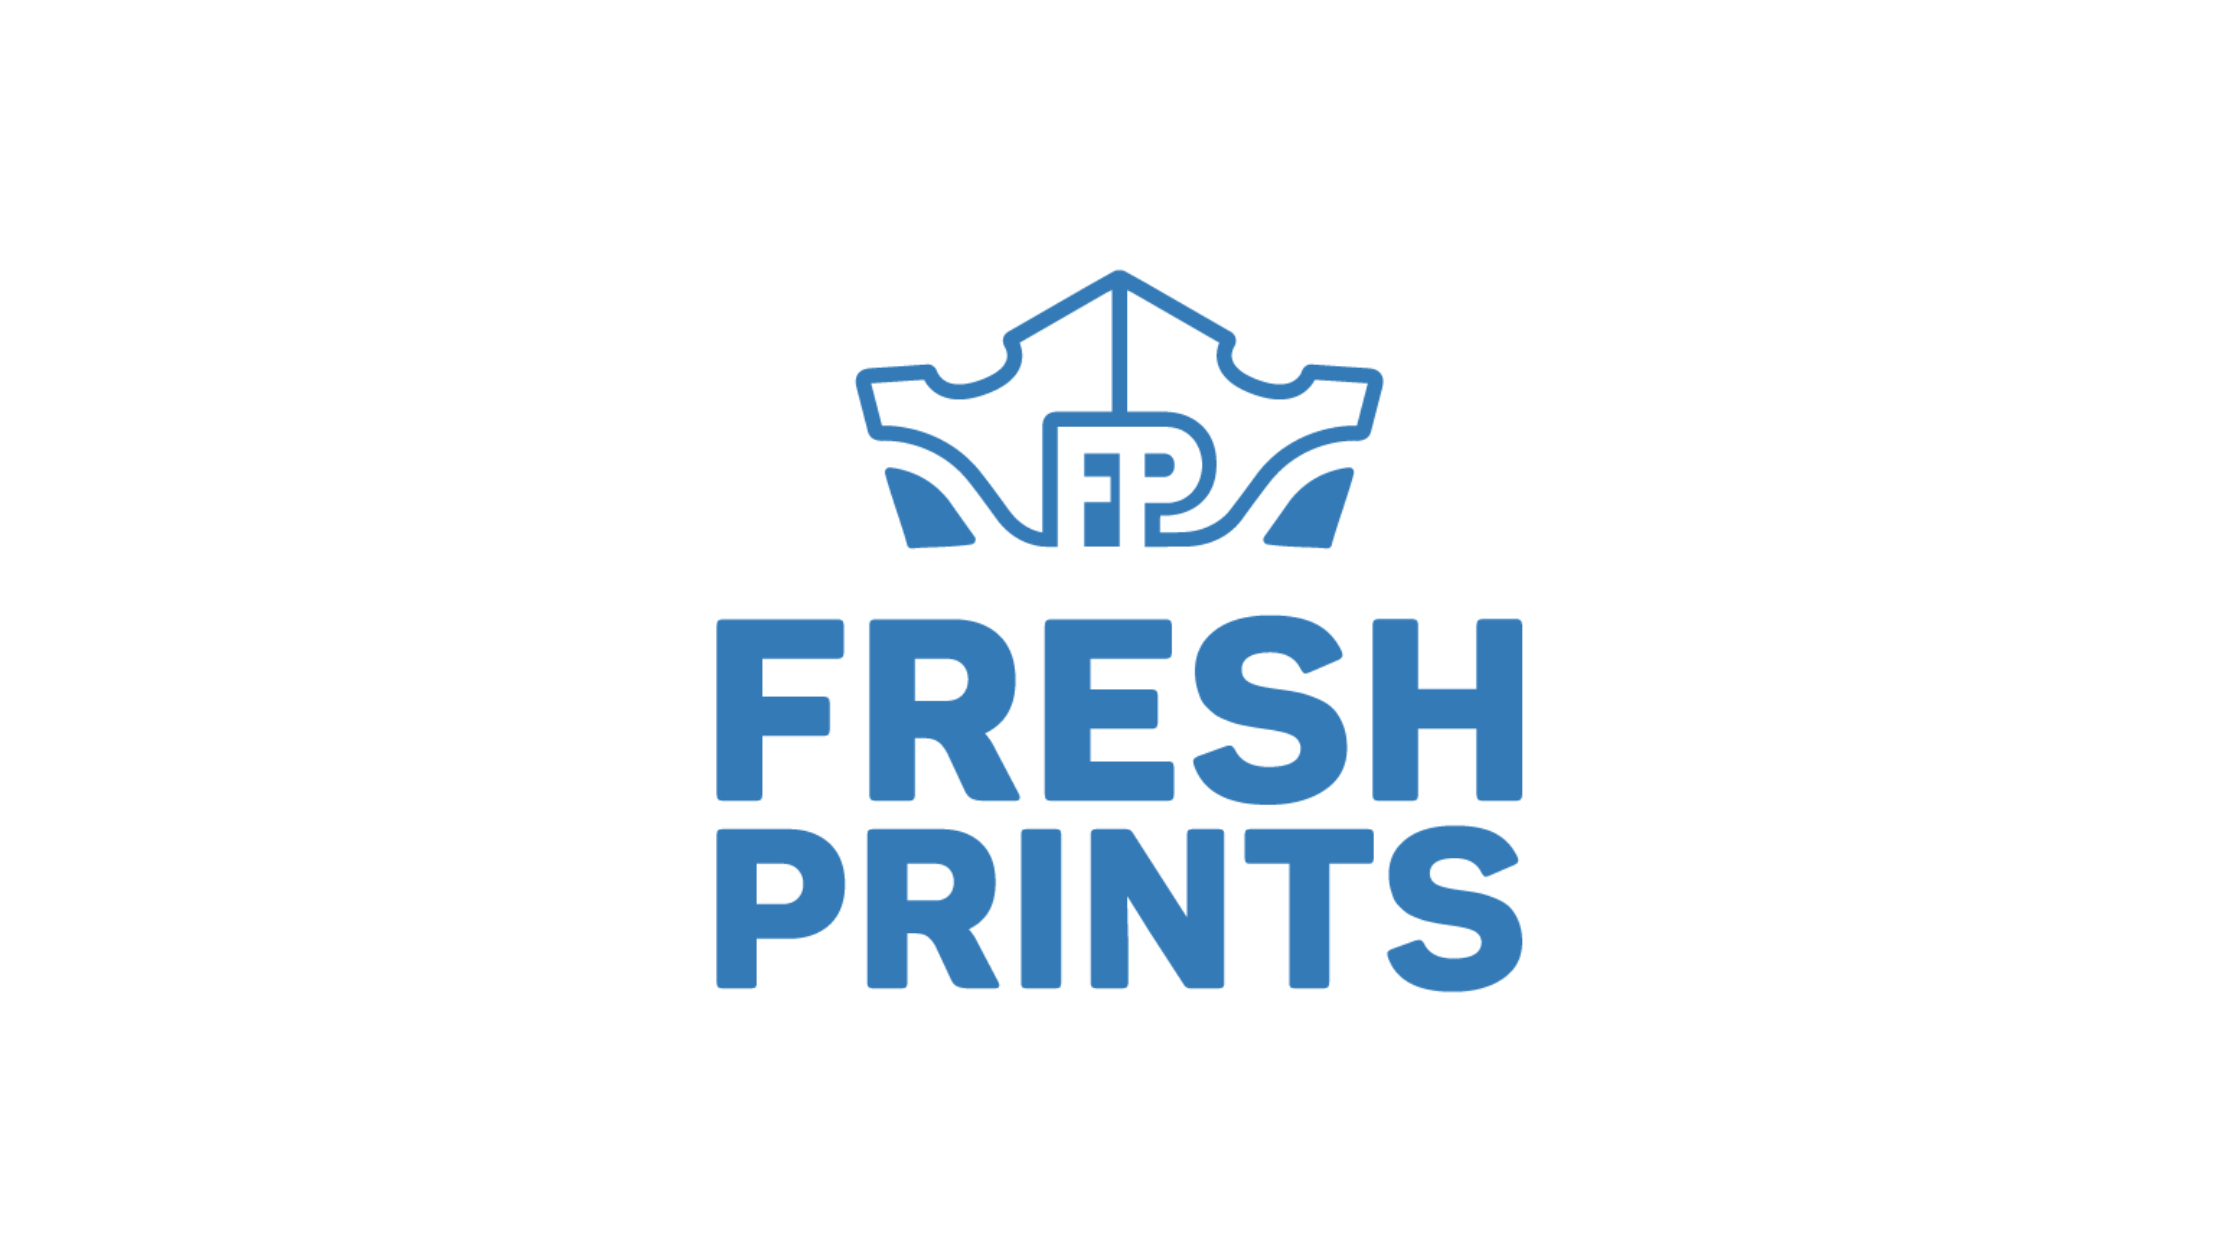 Fresh Prints Work From Home Opportunity